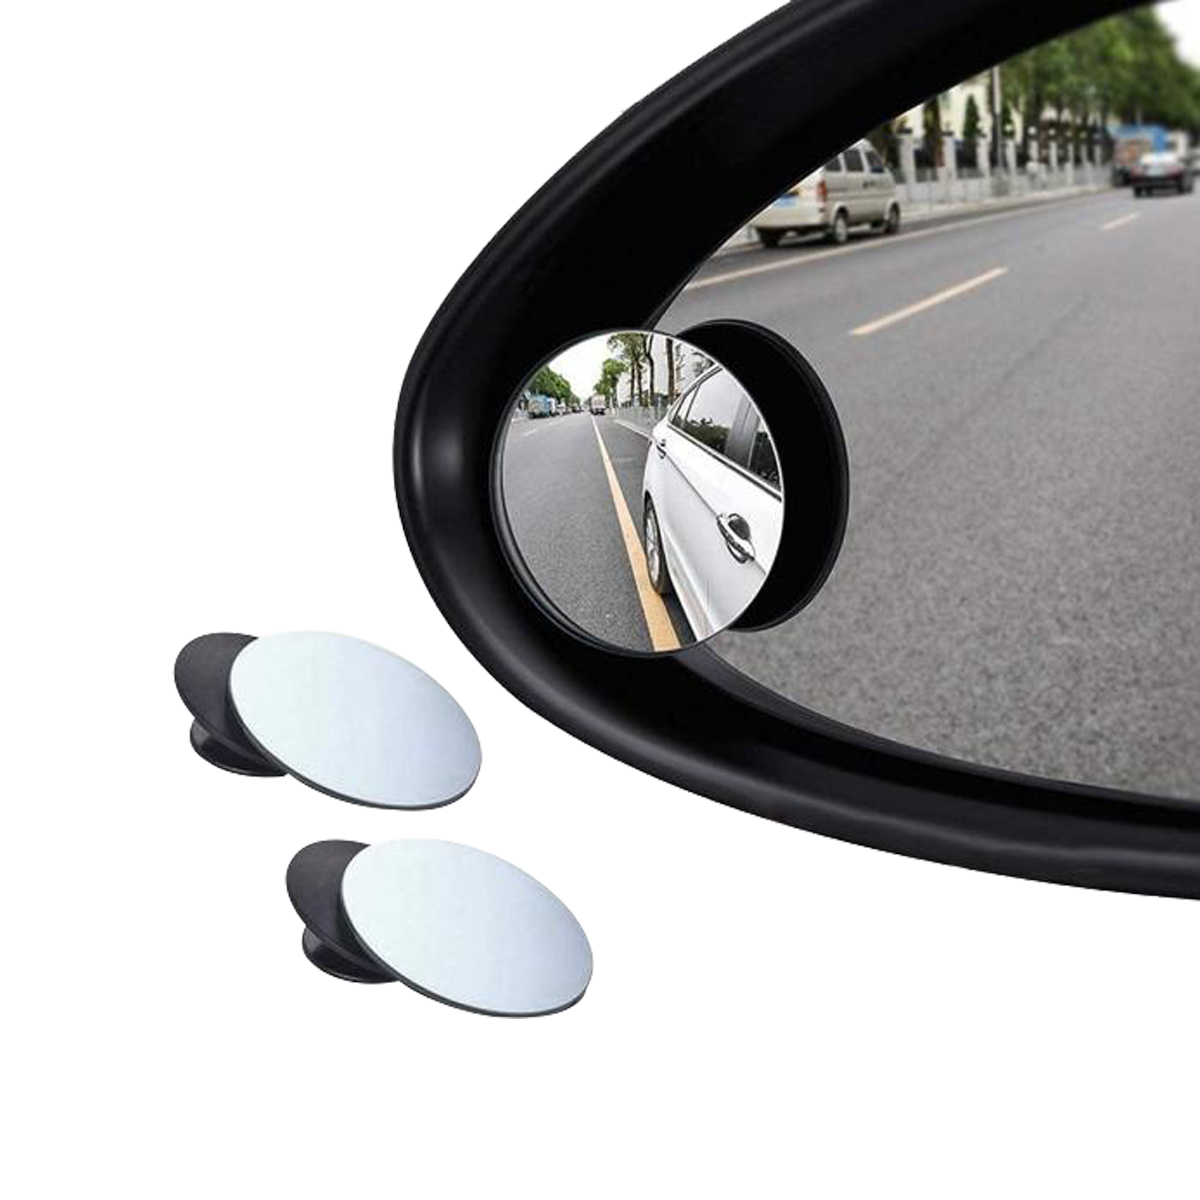 fathers-day-gift-guide/images/Blind-Spot-Mirror-partsavatar-canada.jpeg